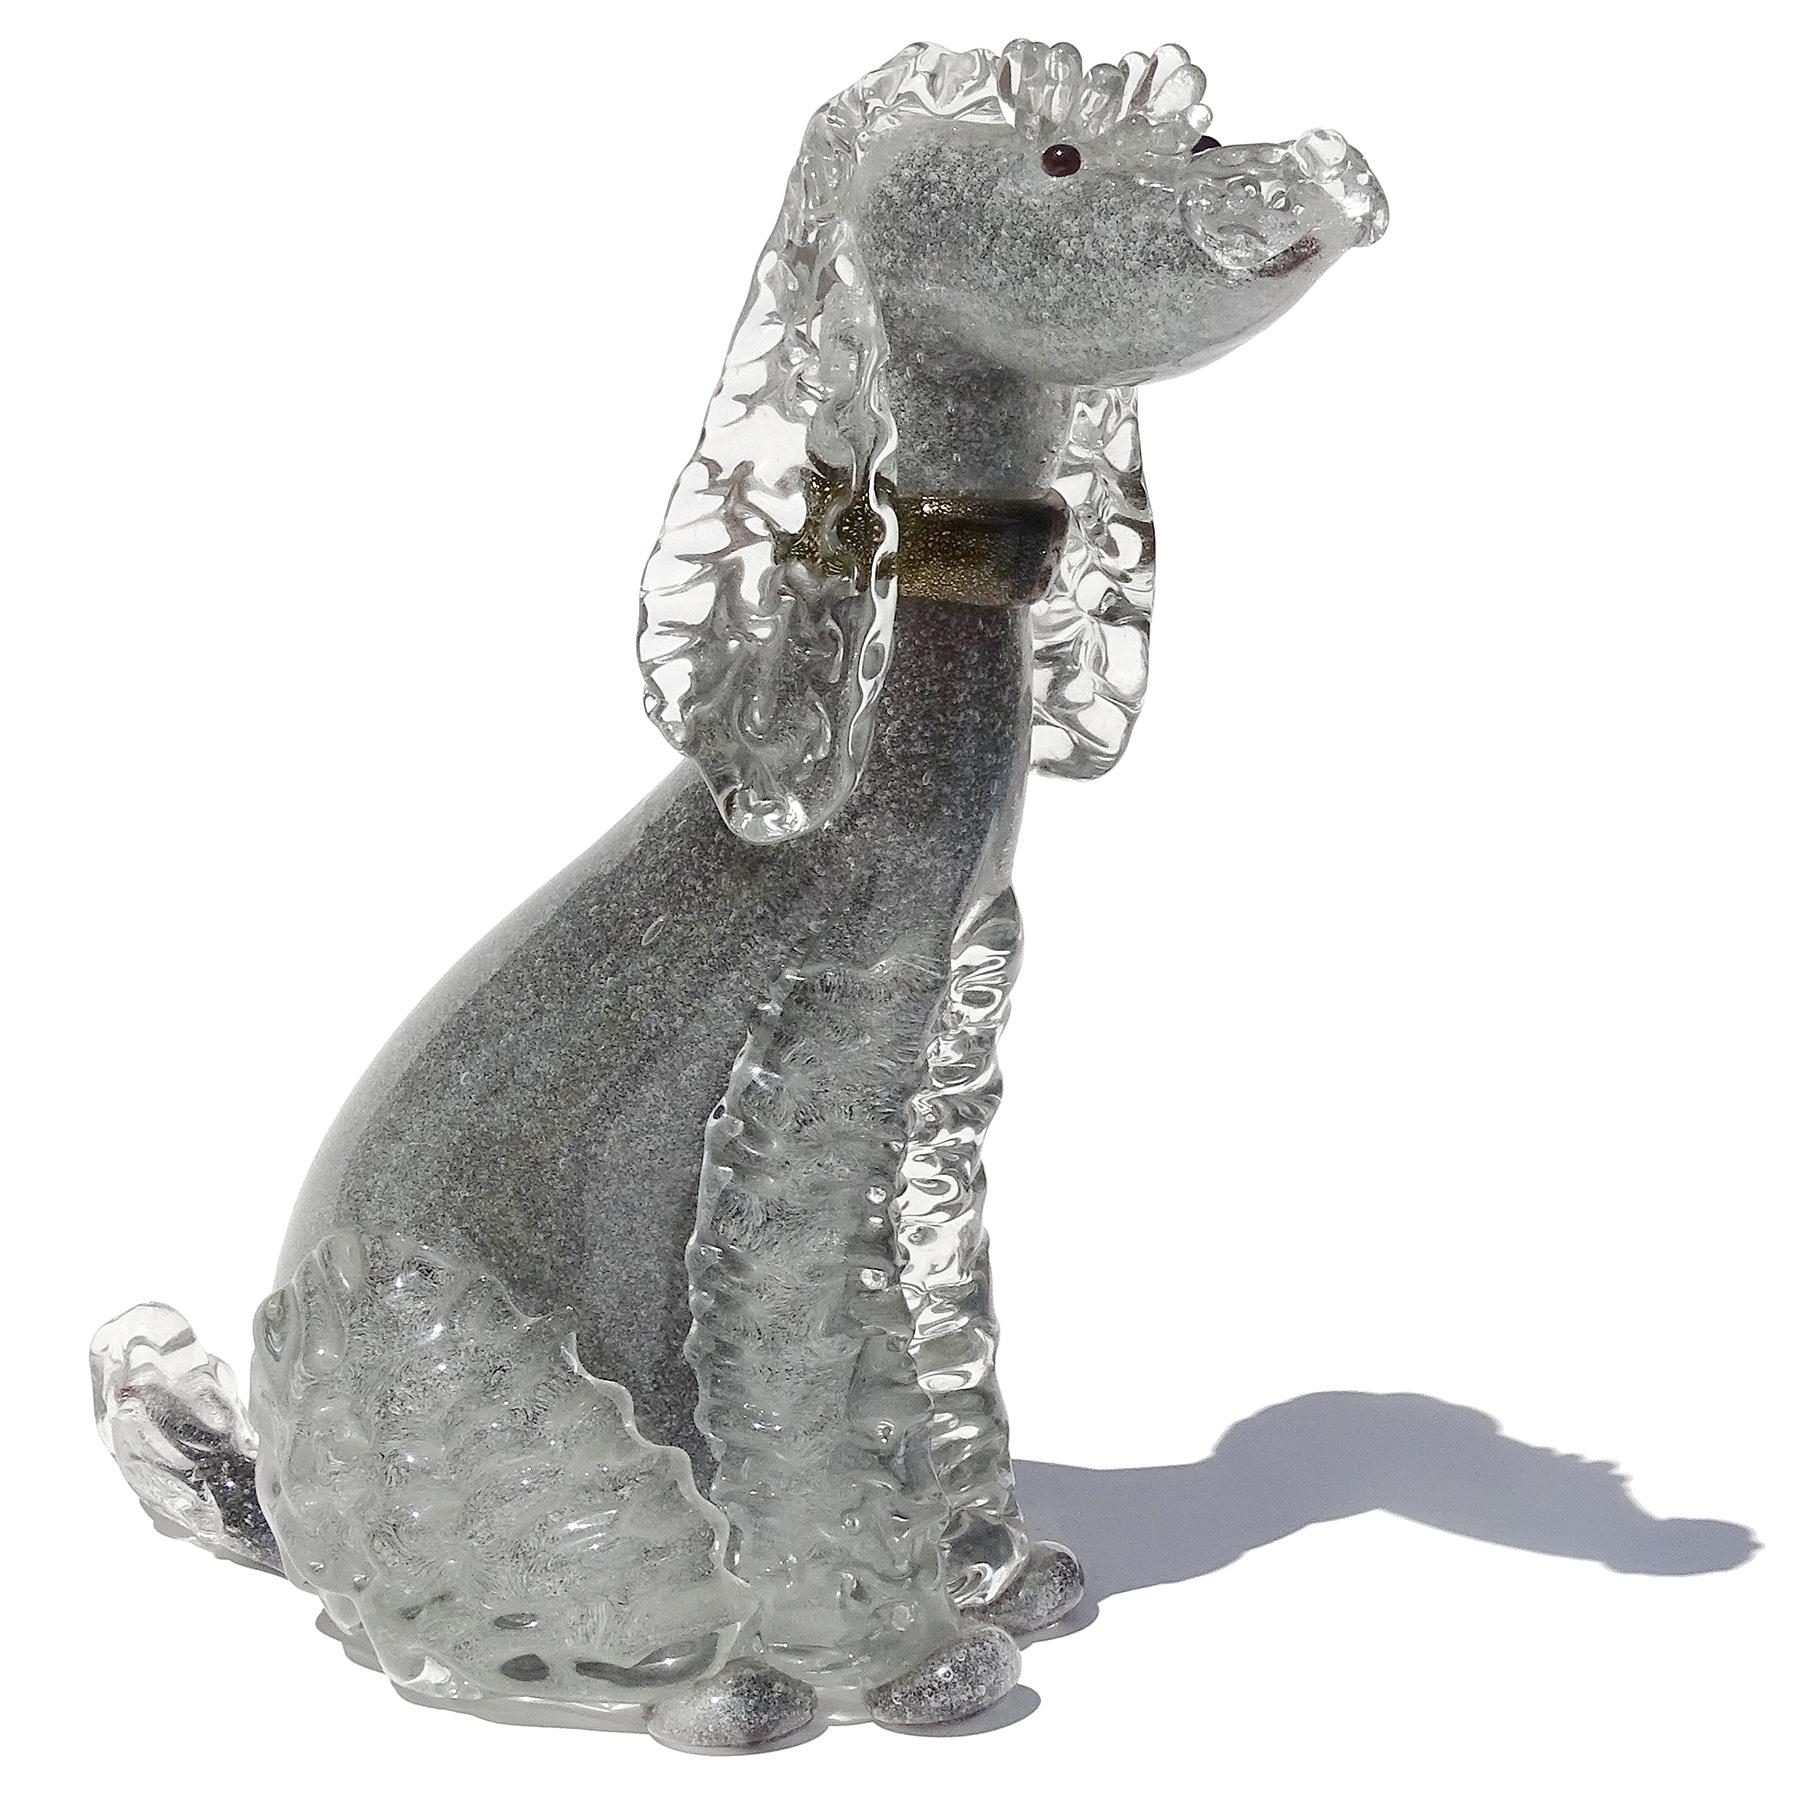 Beautiful and rare, vintage Murano hand blown Pulegoso bubbles, gray, black and gold flecks Italian art glass poodle puppy dog sculpture. Documented to designer Alfredo Barbini, circa 1950-1960 and published in his Weil Ceramics and Glass catalog.